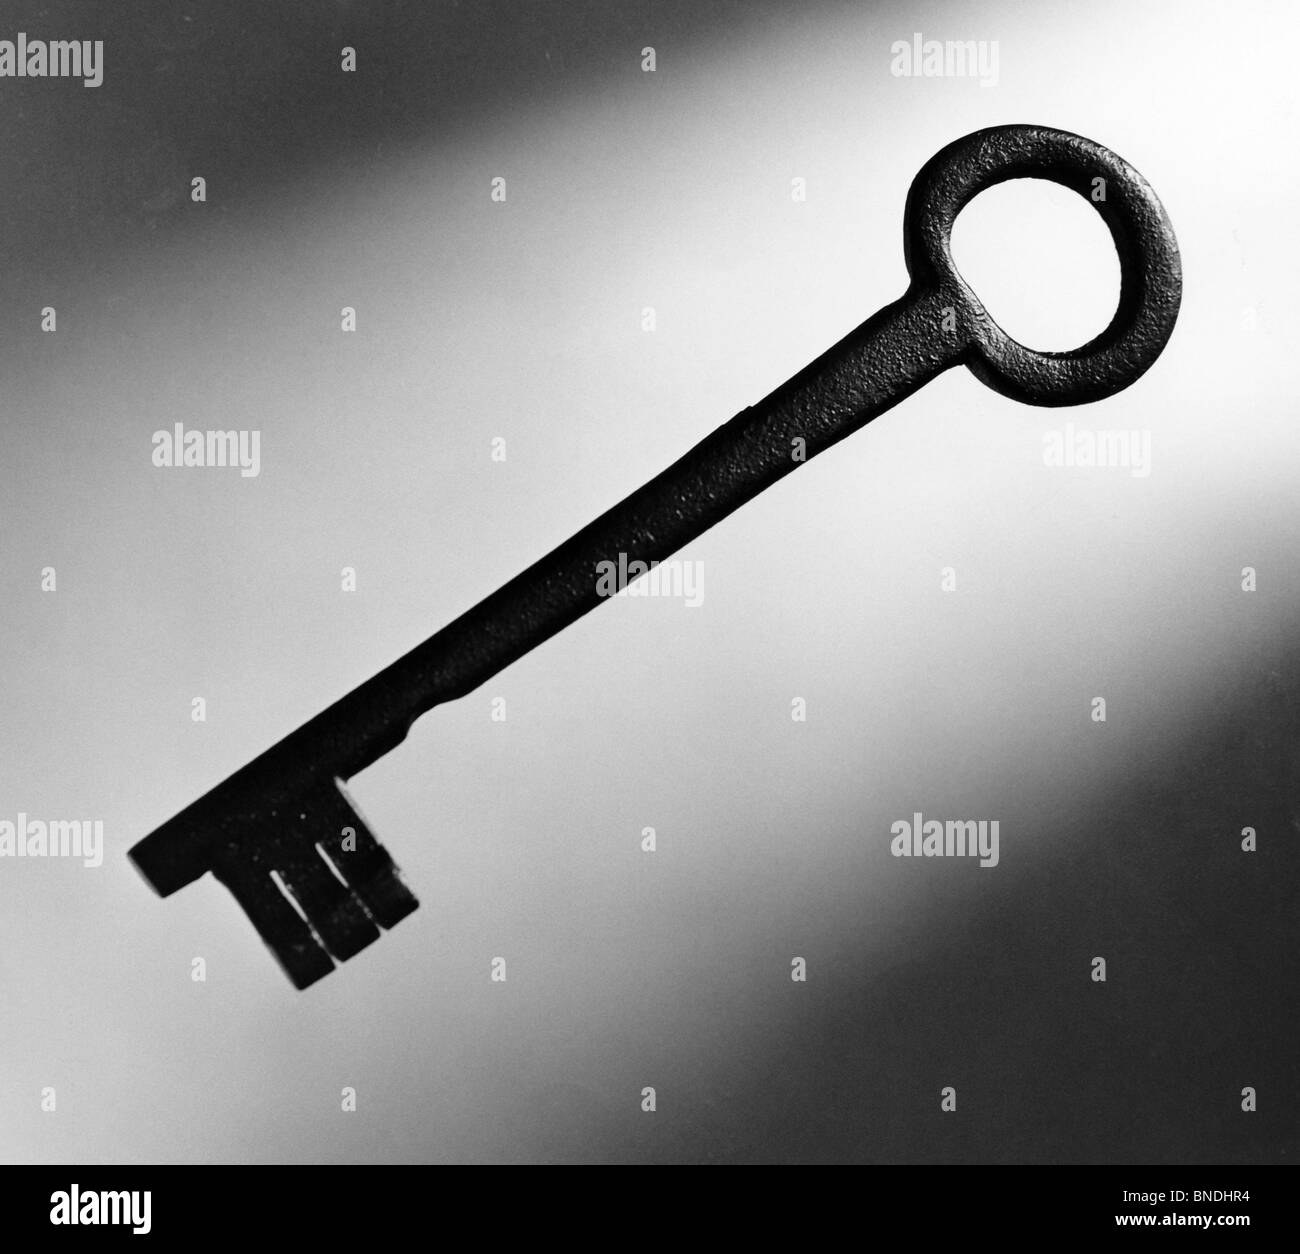 Close-up of an old key Stock Photo